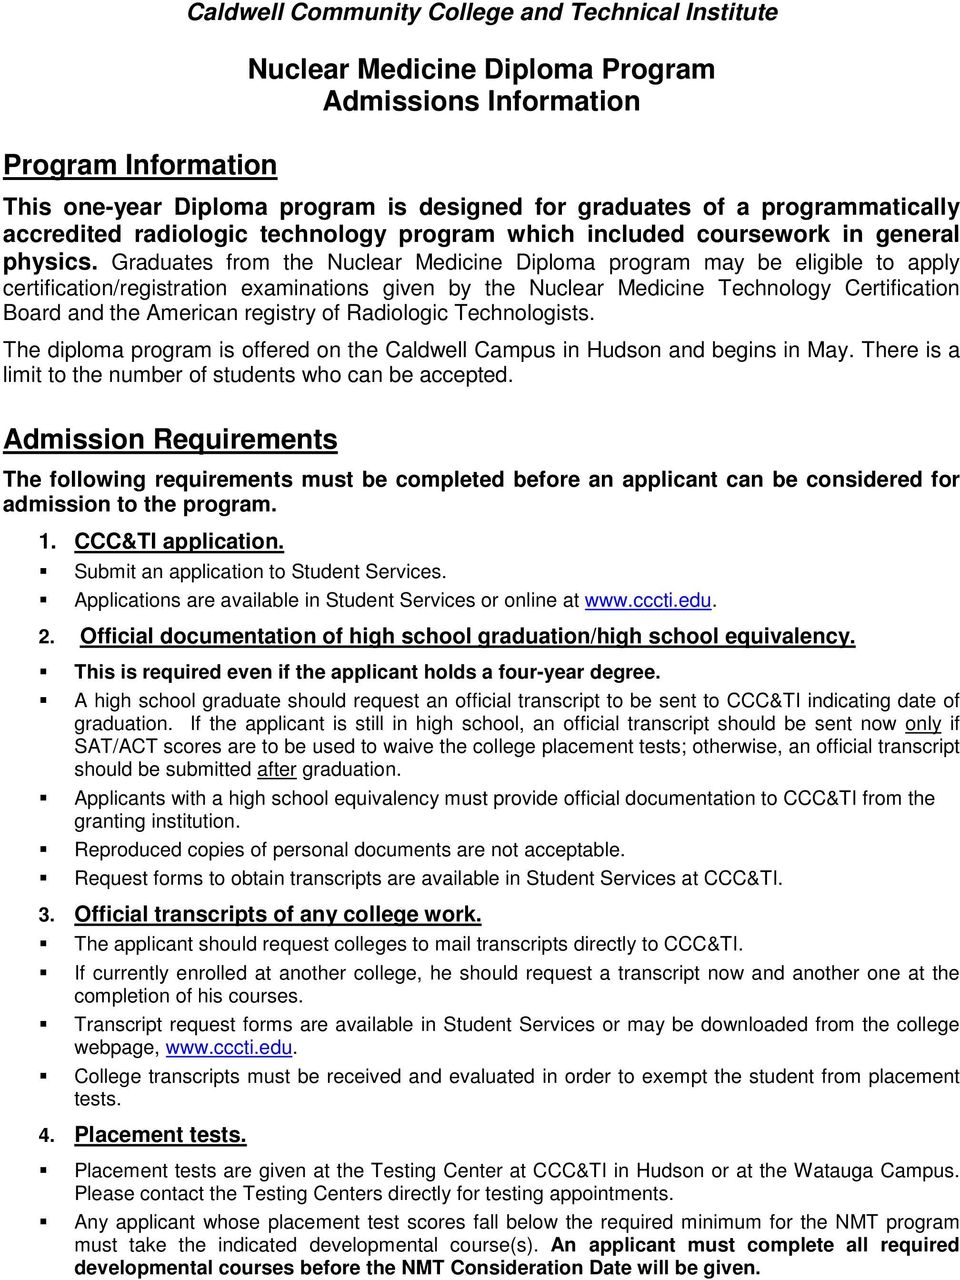 Graduates from the Nuclear Medicine Diploma program may be eligible to apply certification/registration examinations given by the Nuclear Medicine Technology Certification Board and the American